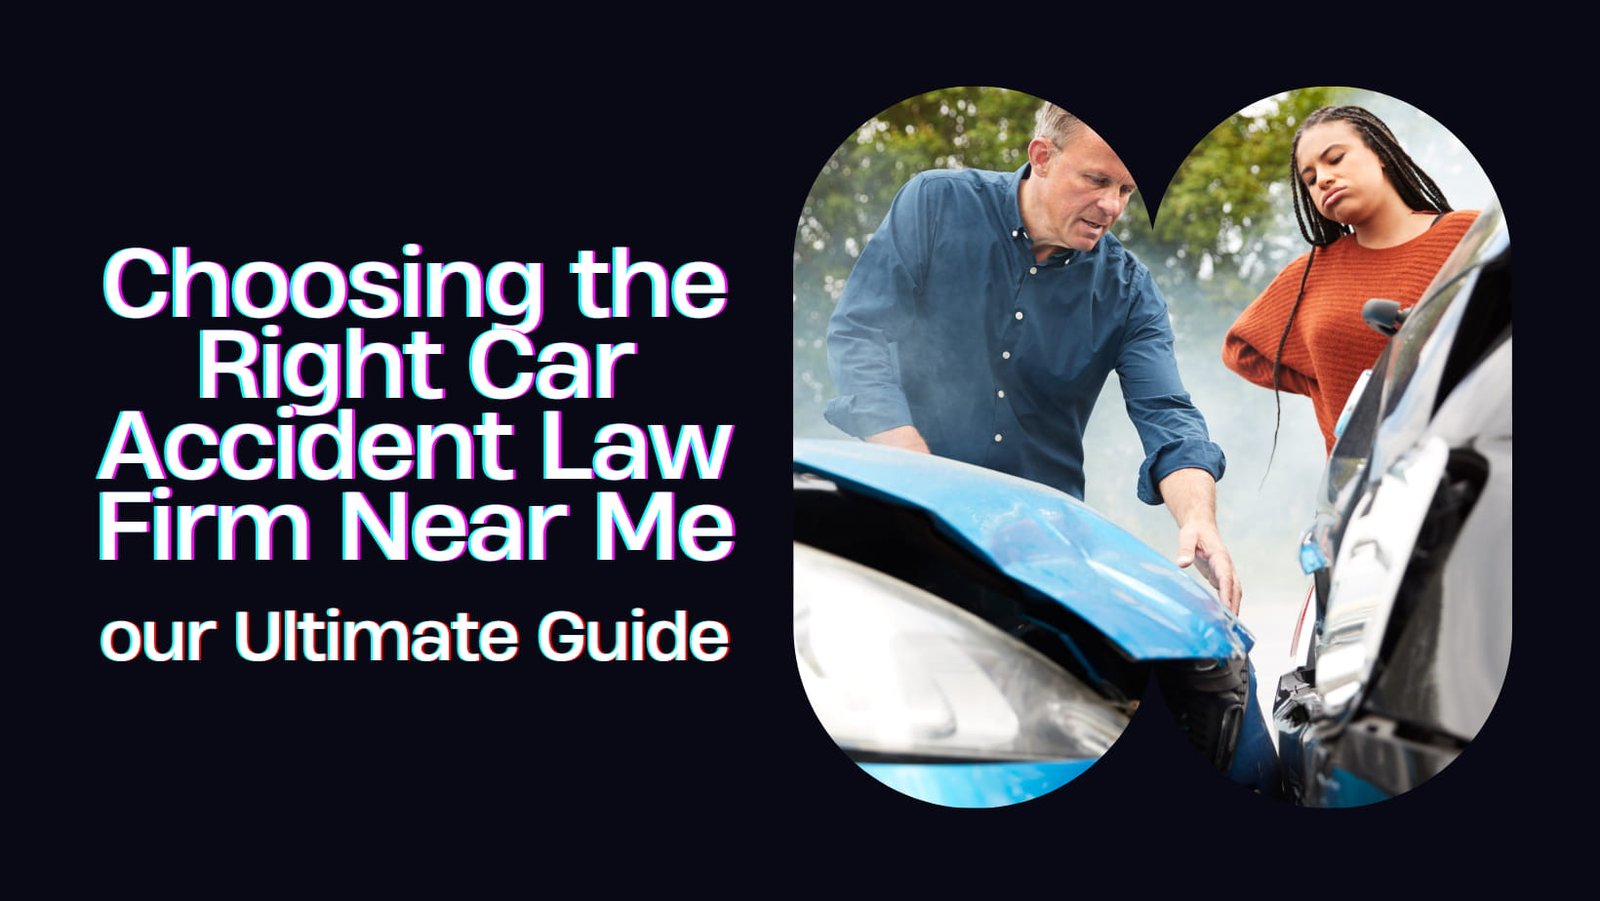 Choosing the Right Car Accident Law Firm Near Me: Your Ultimate Guide